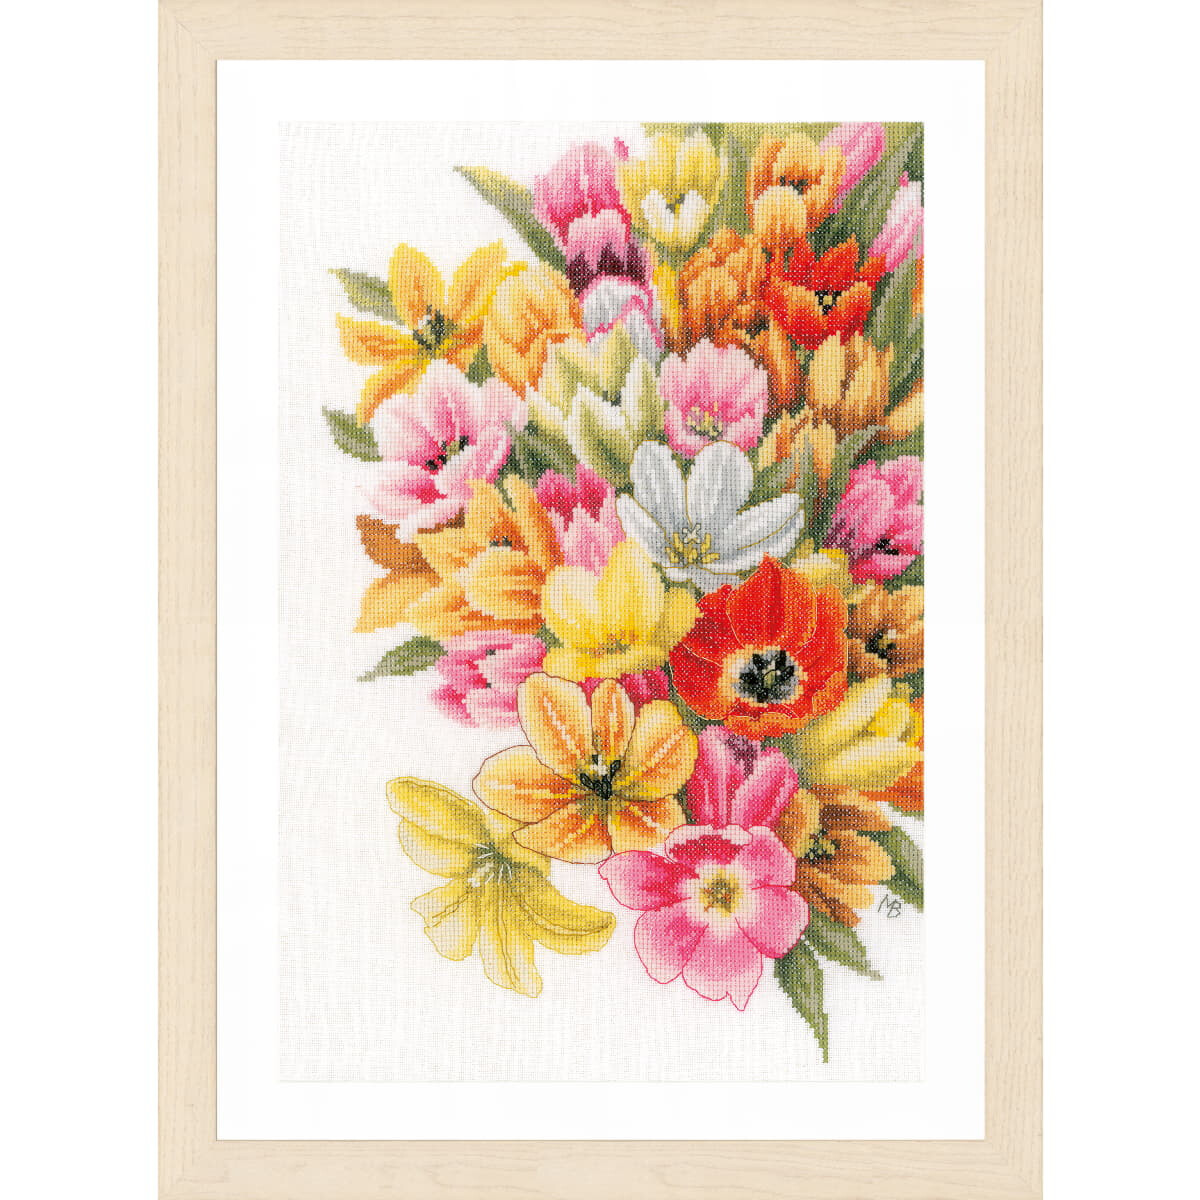 A framed embroidery showing a colorful bouquet of...